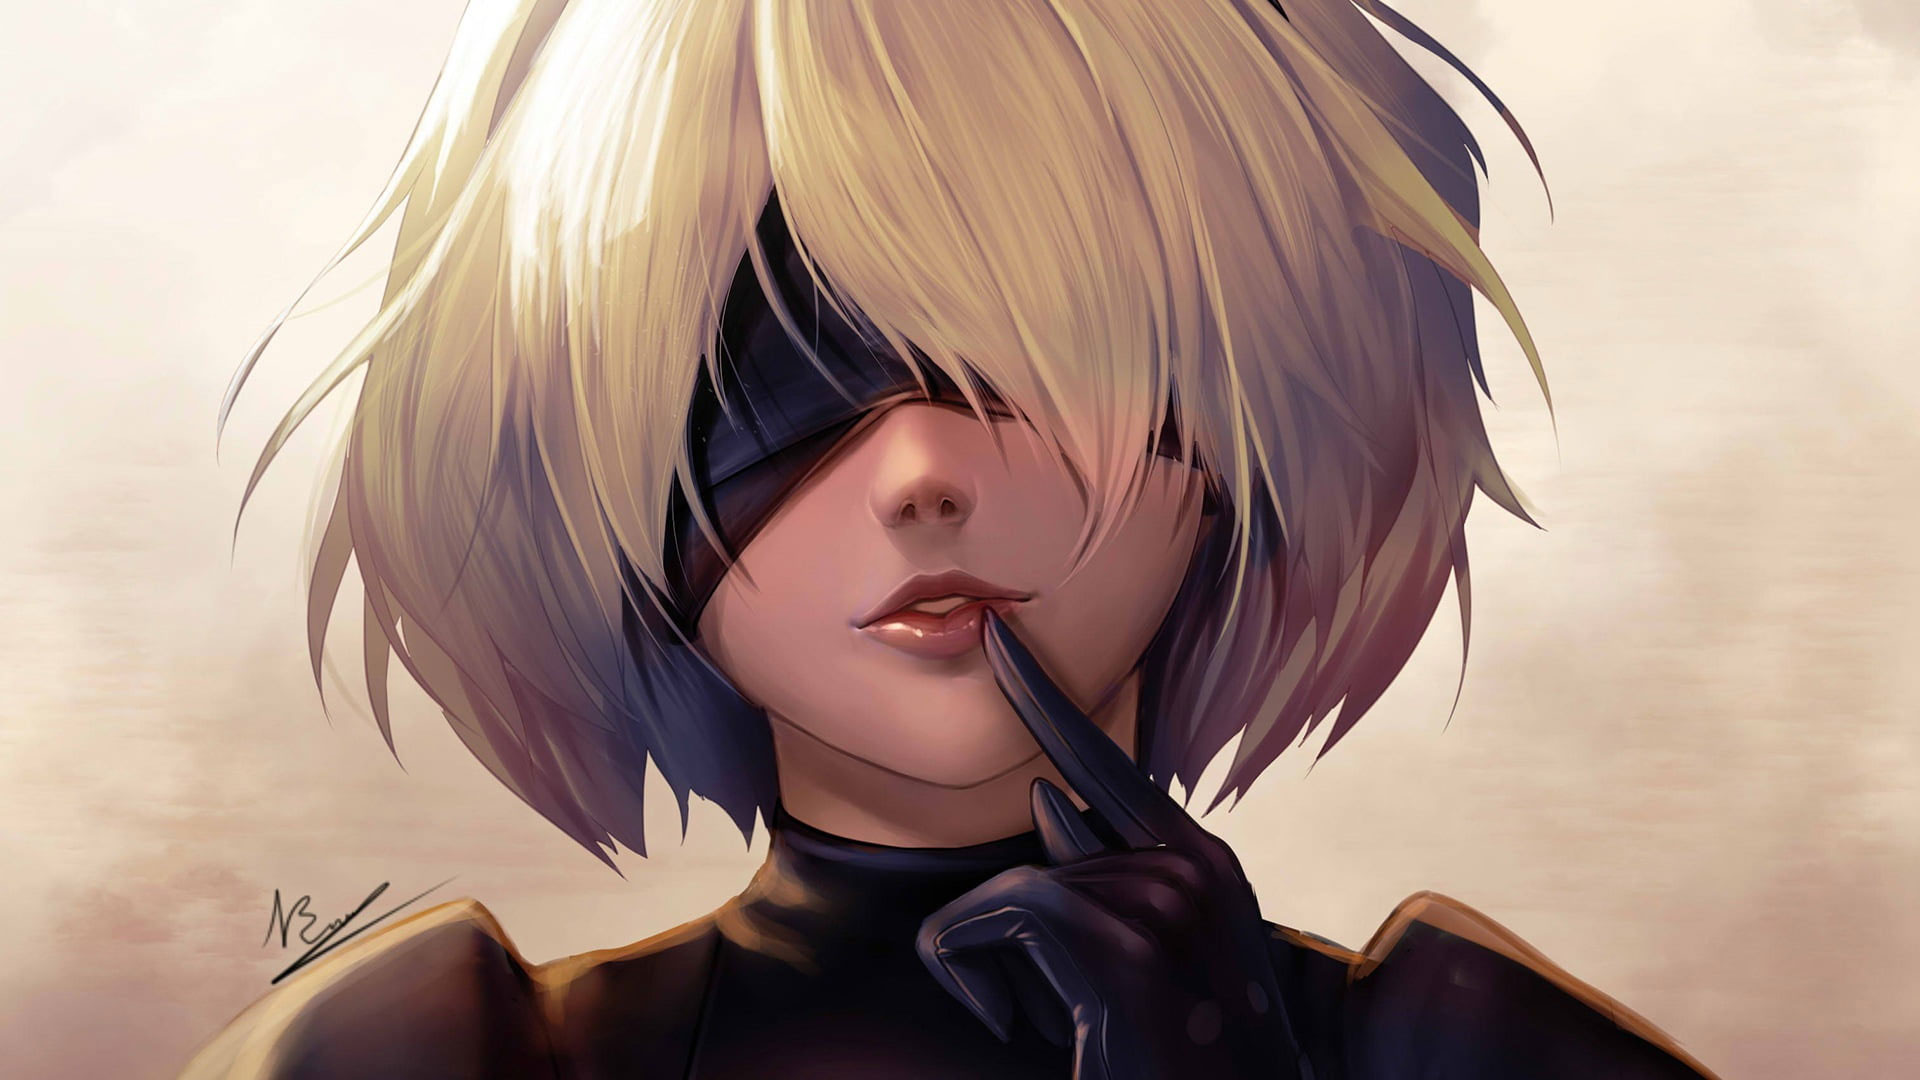 Wallpaper Nier, Yellow Haired Female Anime Character Wearing Black